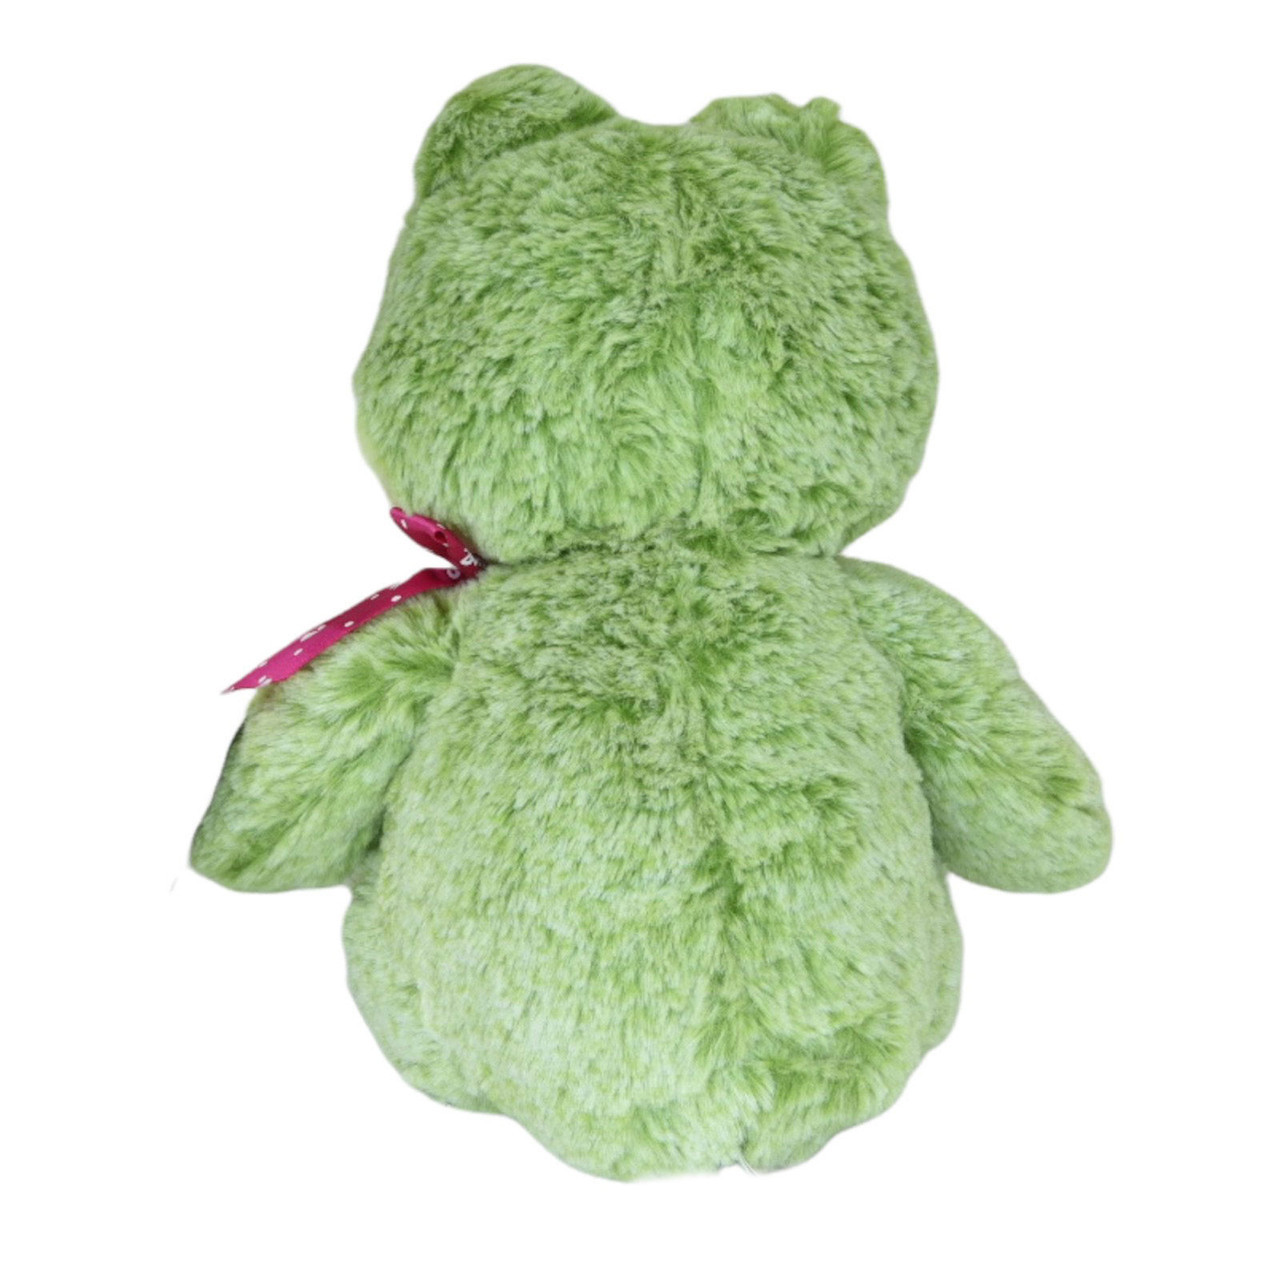 Green Frog Lovey Plush 10 Stuffed Animal Baby Toy A&A Global Pink